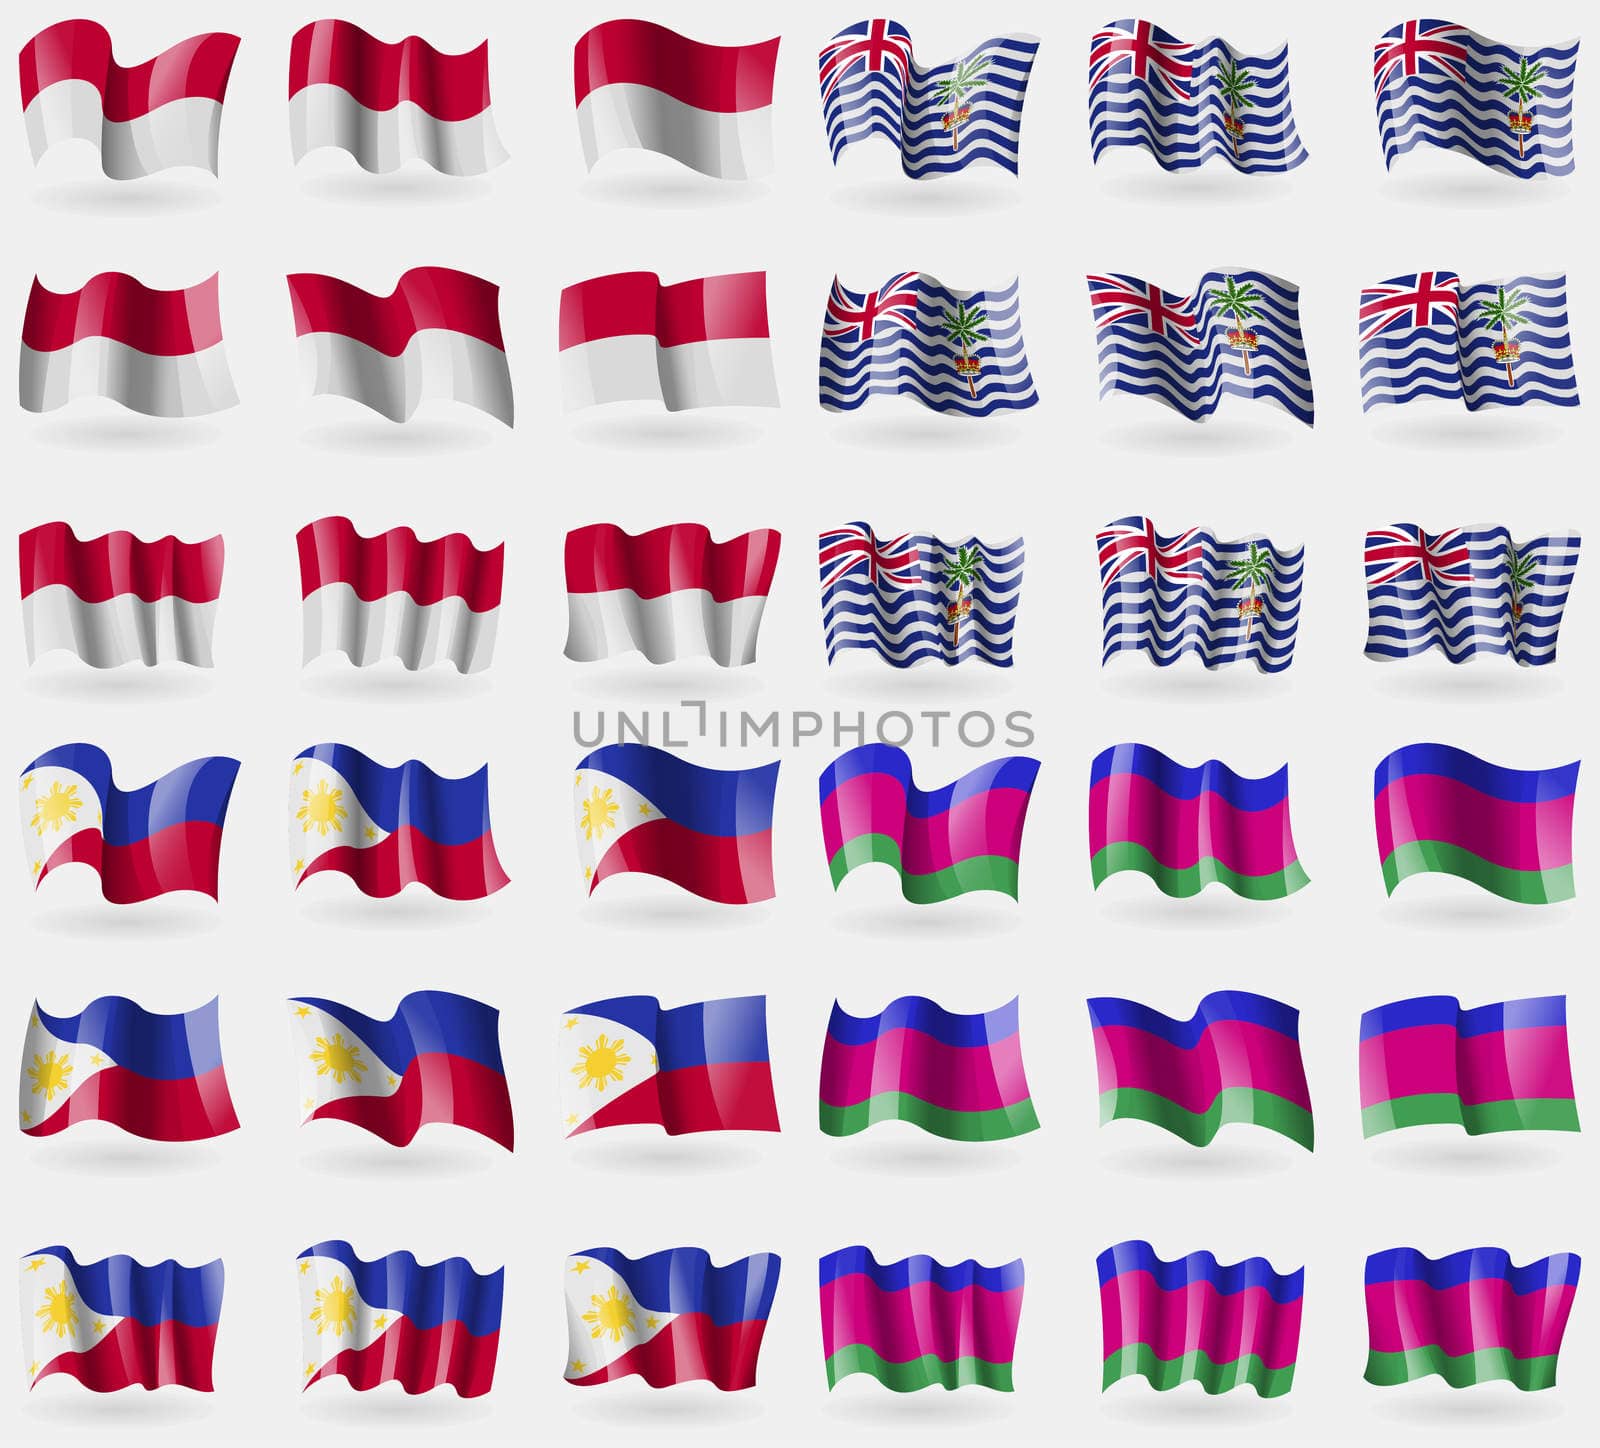 Indonesia, British Indian Ocean Territory, Philippines, Kuban Republic. Set of 36 flags of the countries of the world. illustration